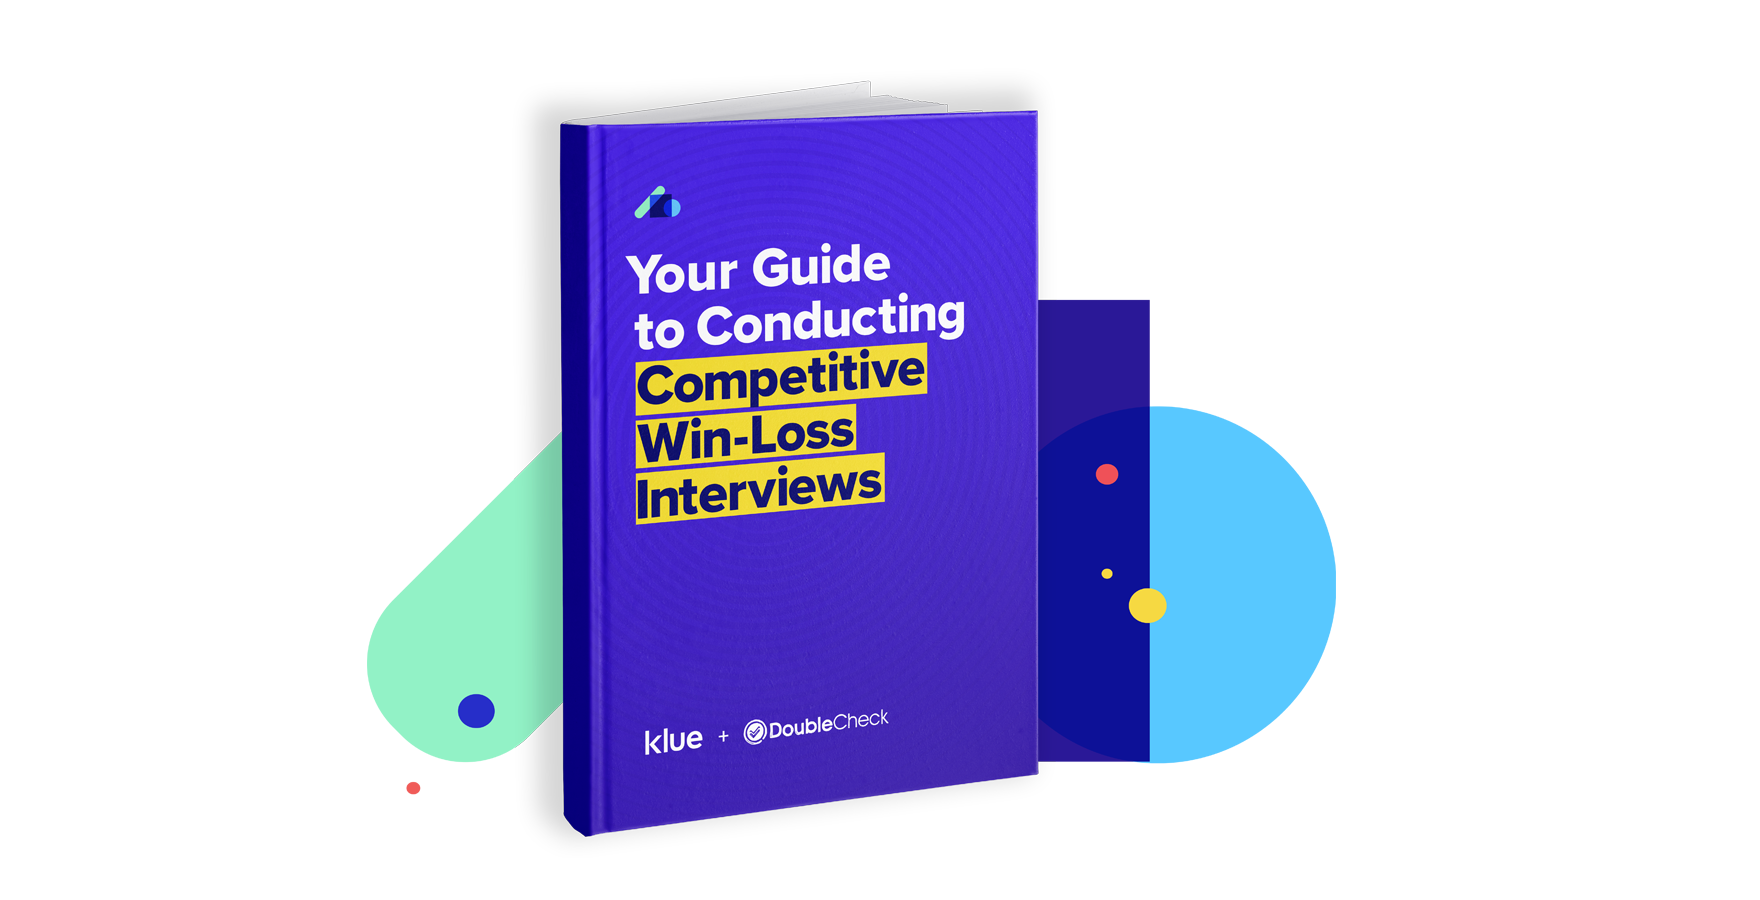 Your-Guide-to-Conducting-Competitive-Win-Loss-Interviews_Website-Resource